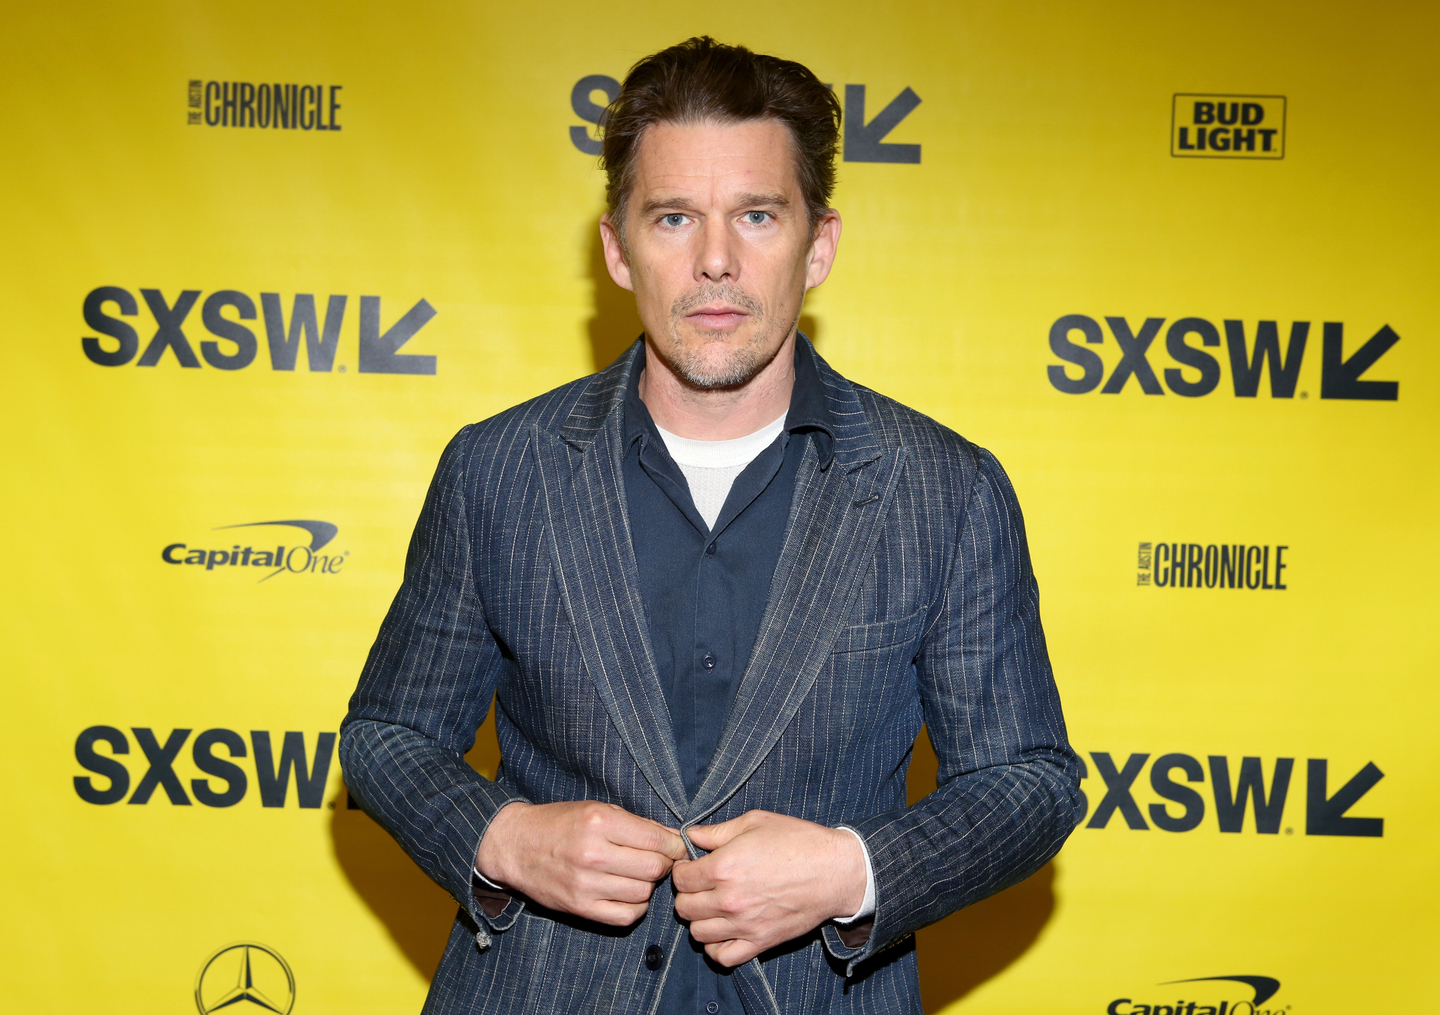 Blaze Director Ethan Hawke was on-hand for “A Conversation with Ethan Hawke.”